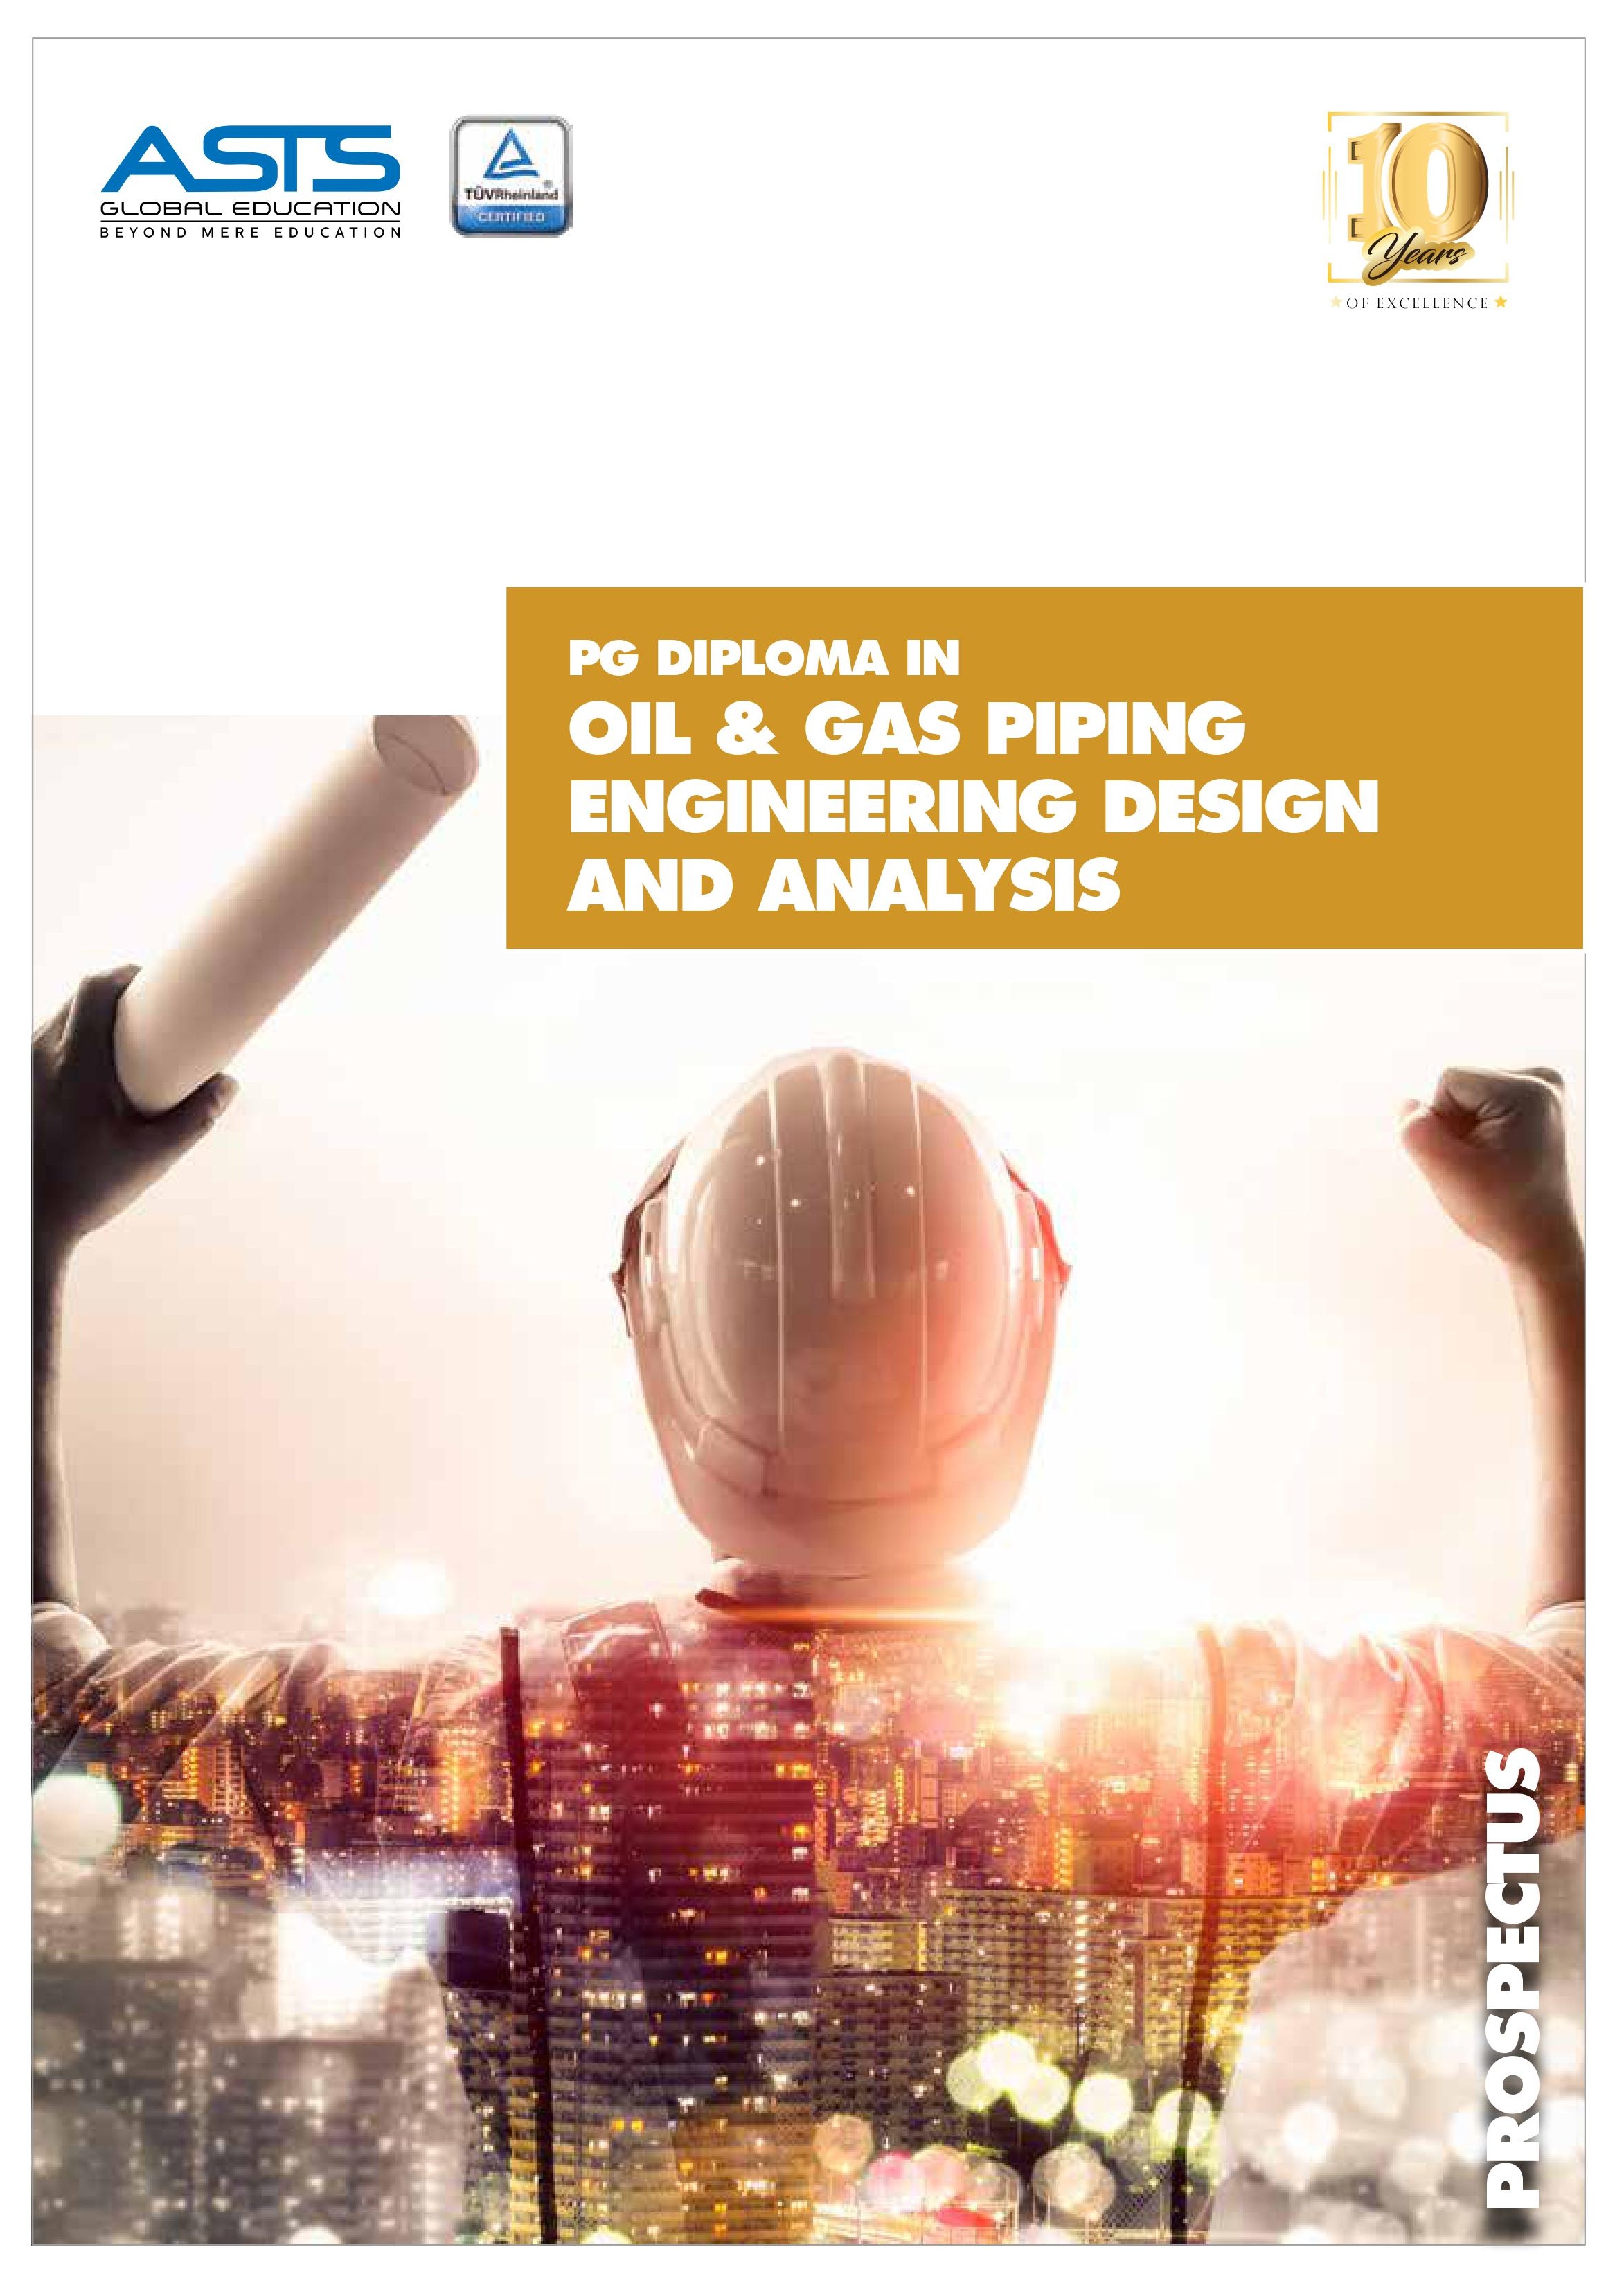 Piping Engineering Design & Analysis online course